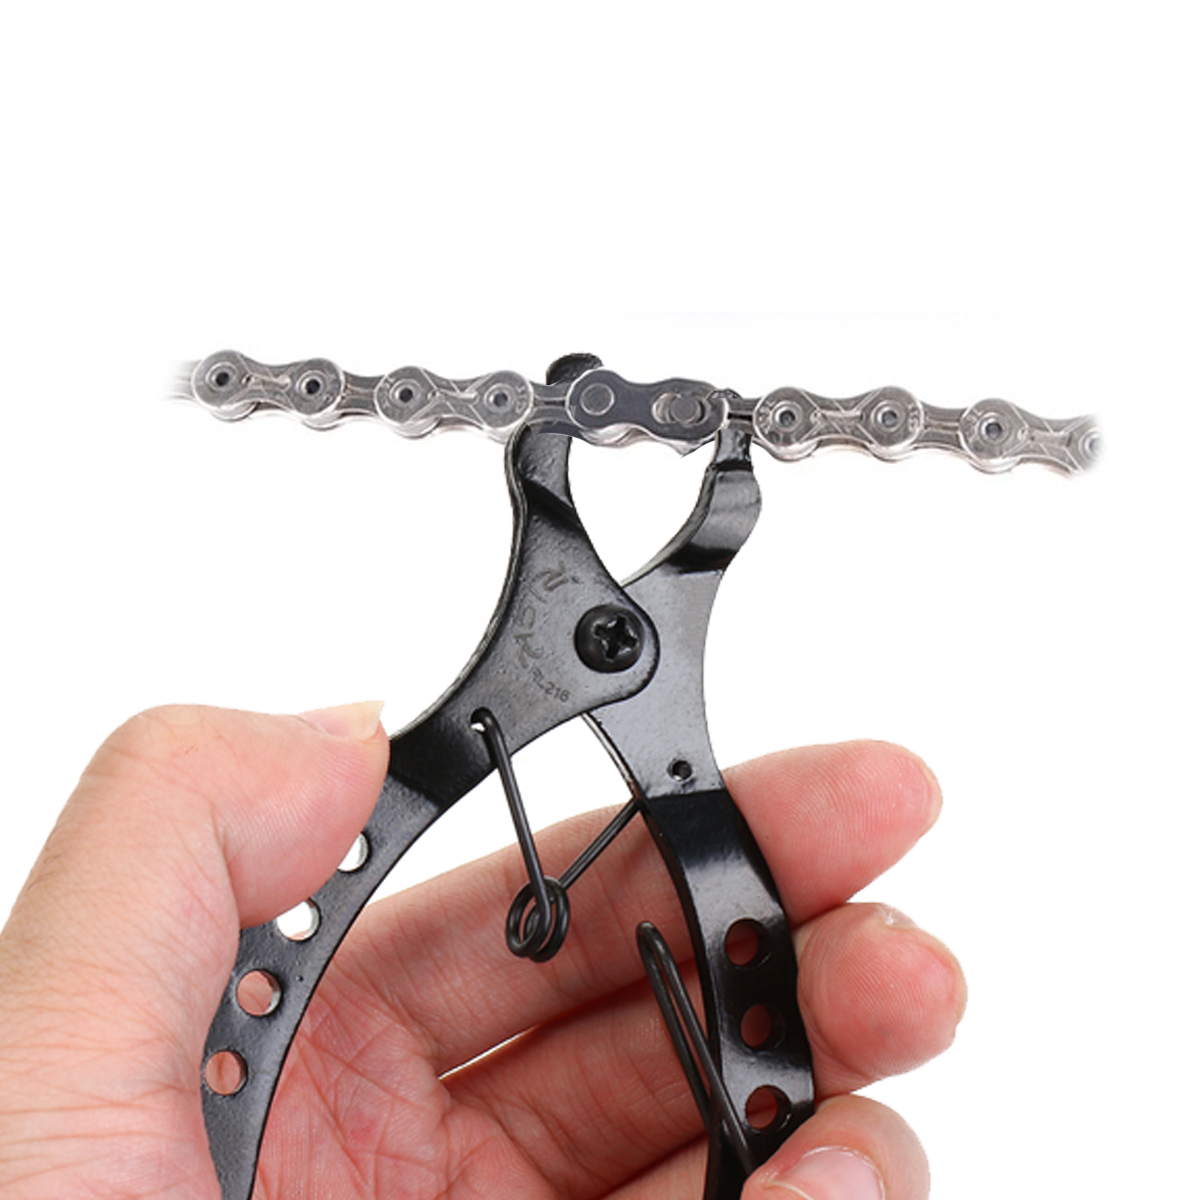 Mini-Chain-Quick-Link-Tool-Bicycle-Plier-Mountain-Bike-Chains-Clamp-Buckle-1749898-7